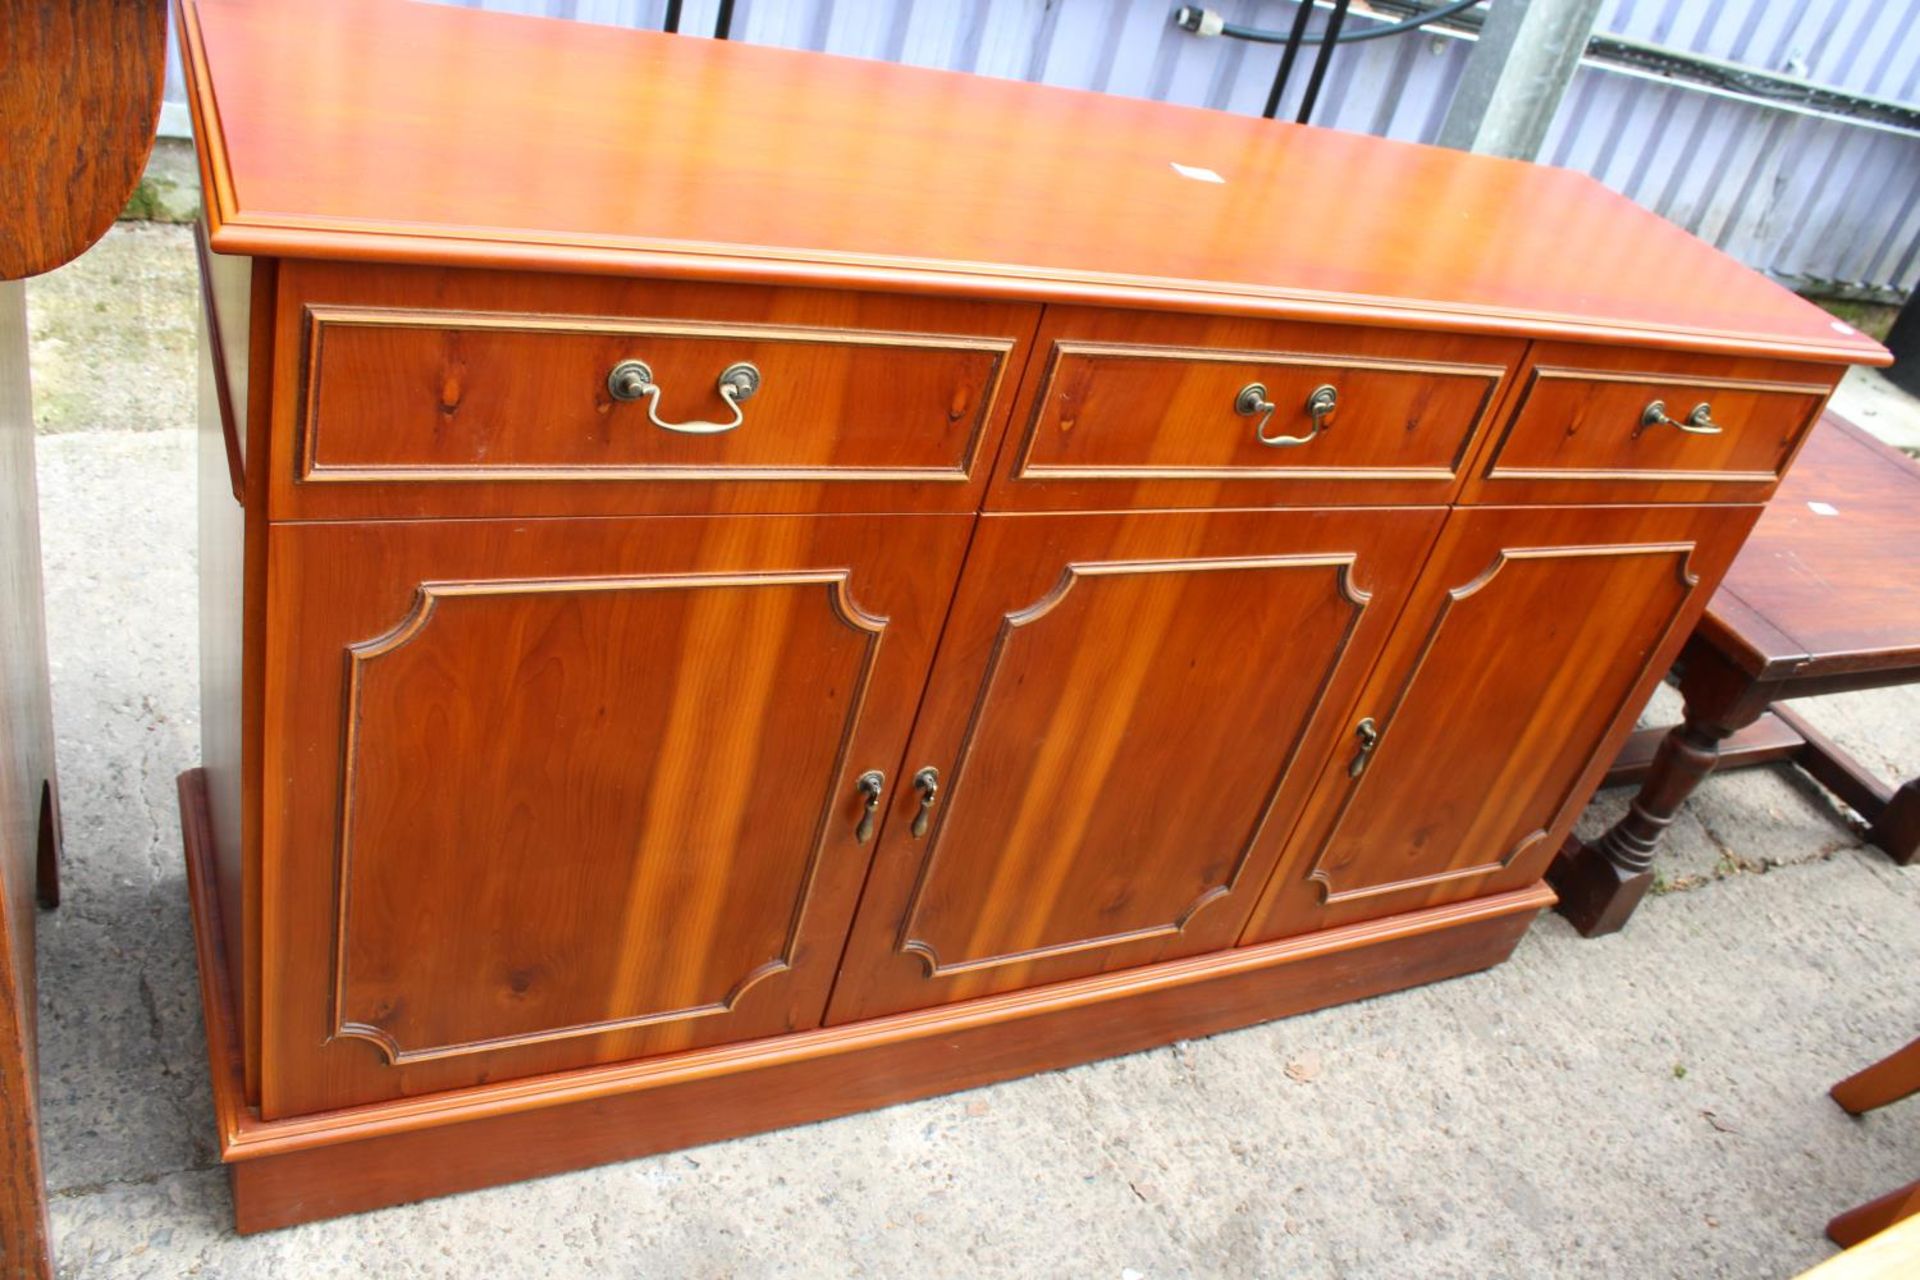 A MODERN YEW WOOD SIDEBOARD - 52" WIDE - Image 2 of 3